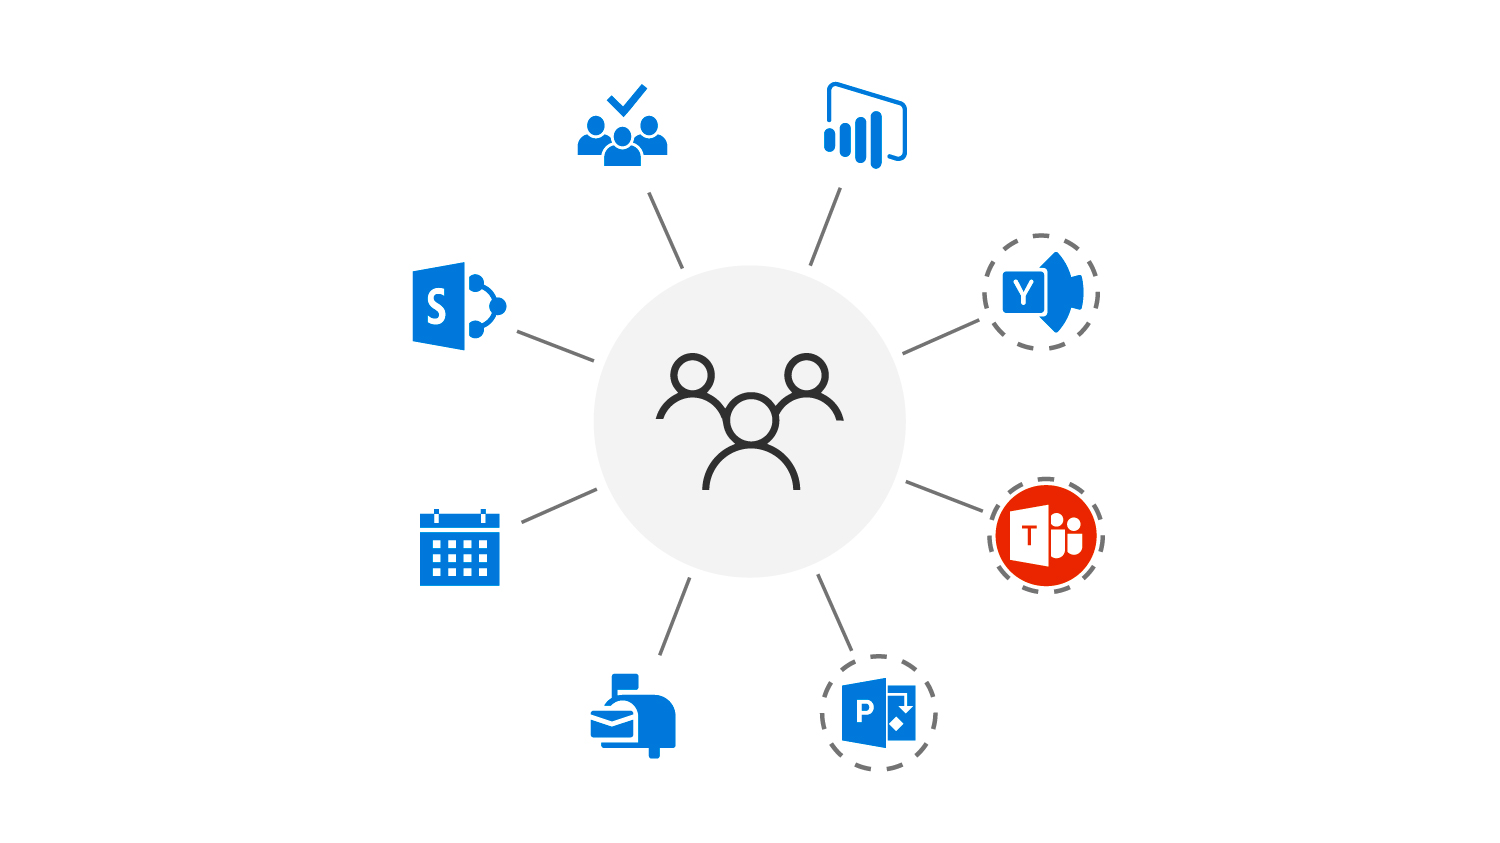 image that shows Microsoft Teams icon in the middle with icons branched out from it that represent all the Microsoft 365 services that are integrated with Teams